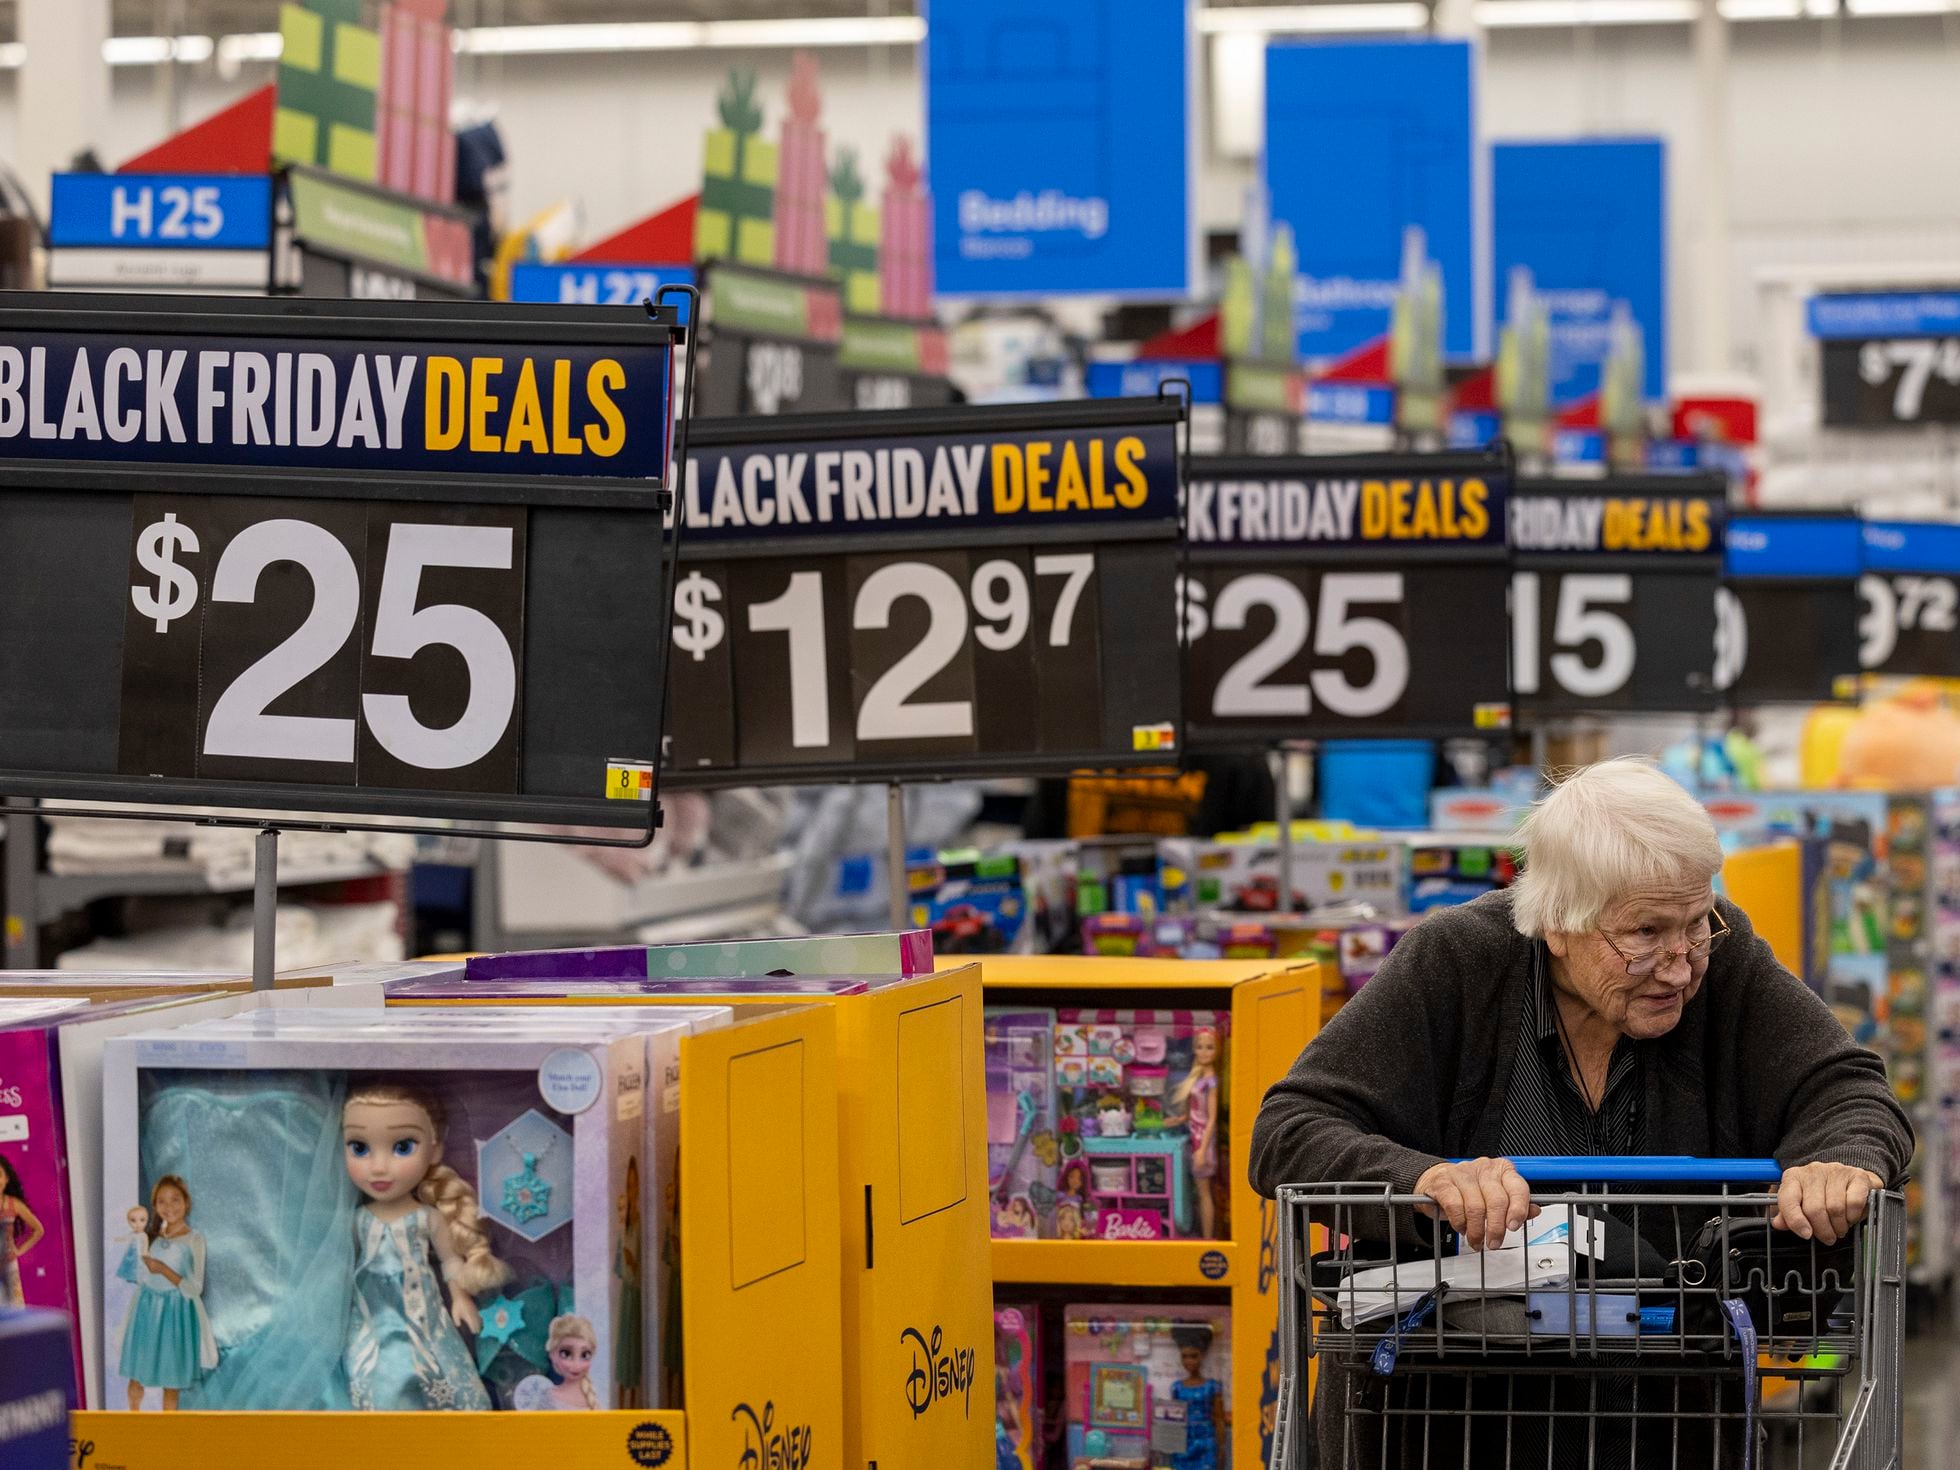 Walmart Black Friday 2023 Deals: The Best Deals Available Now